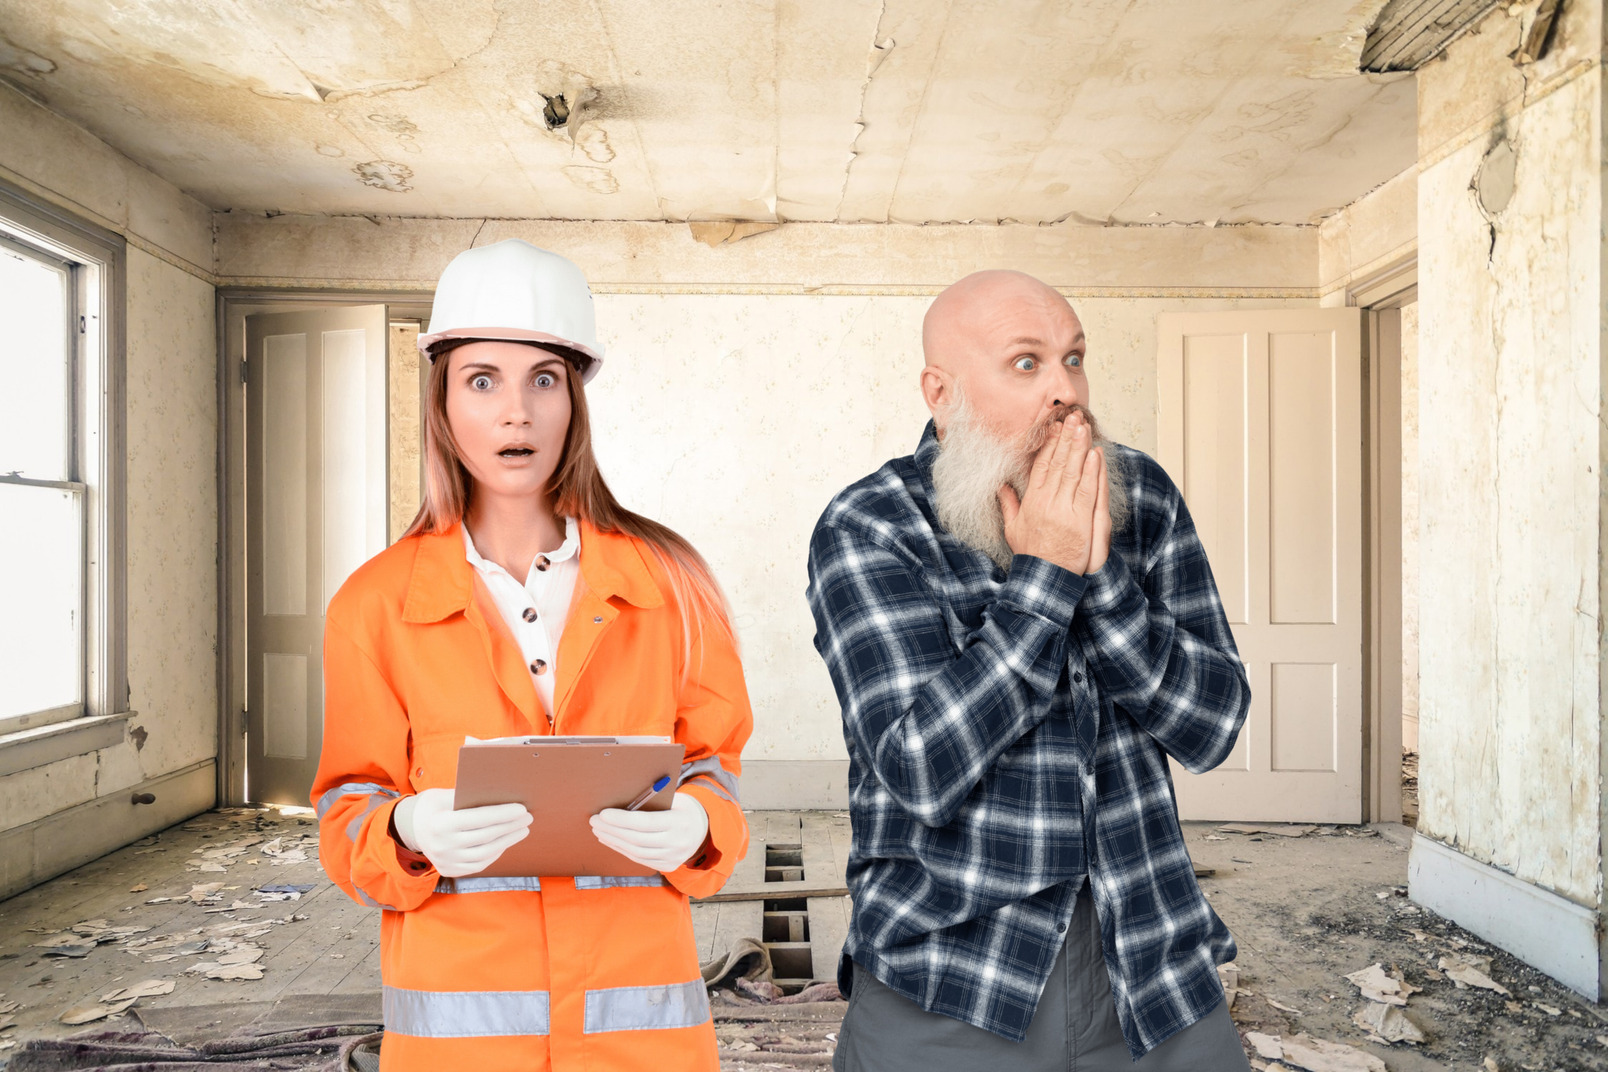 Gasping old client and female foreman standing in ruined room